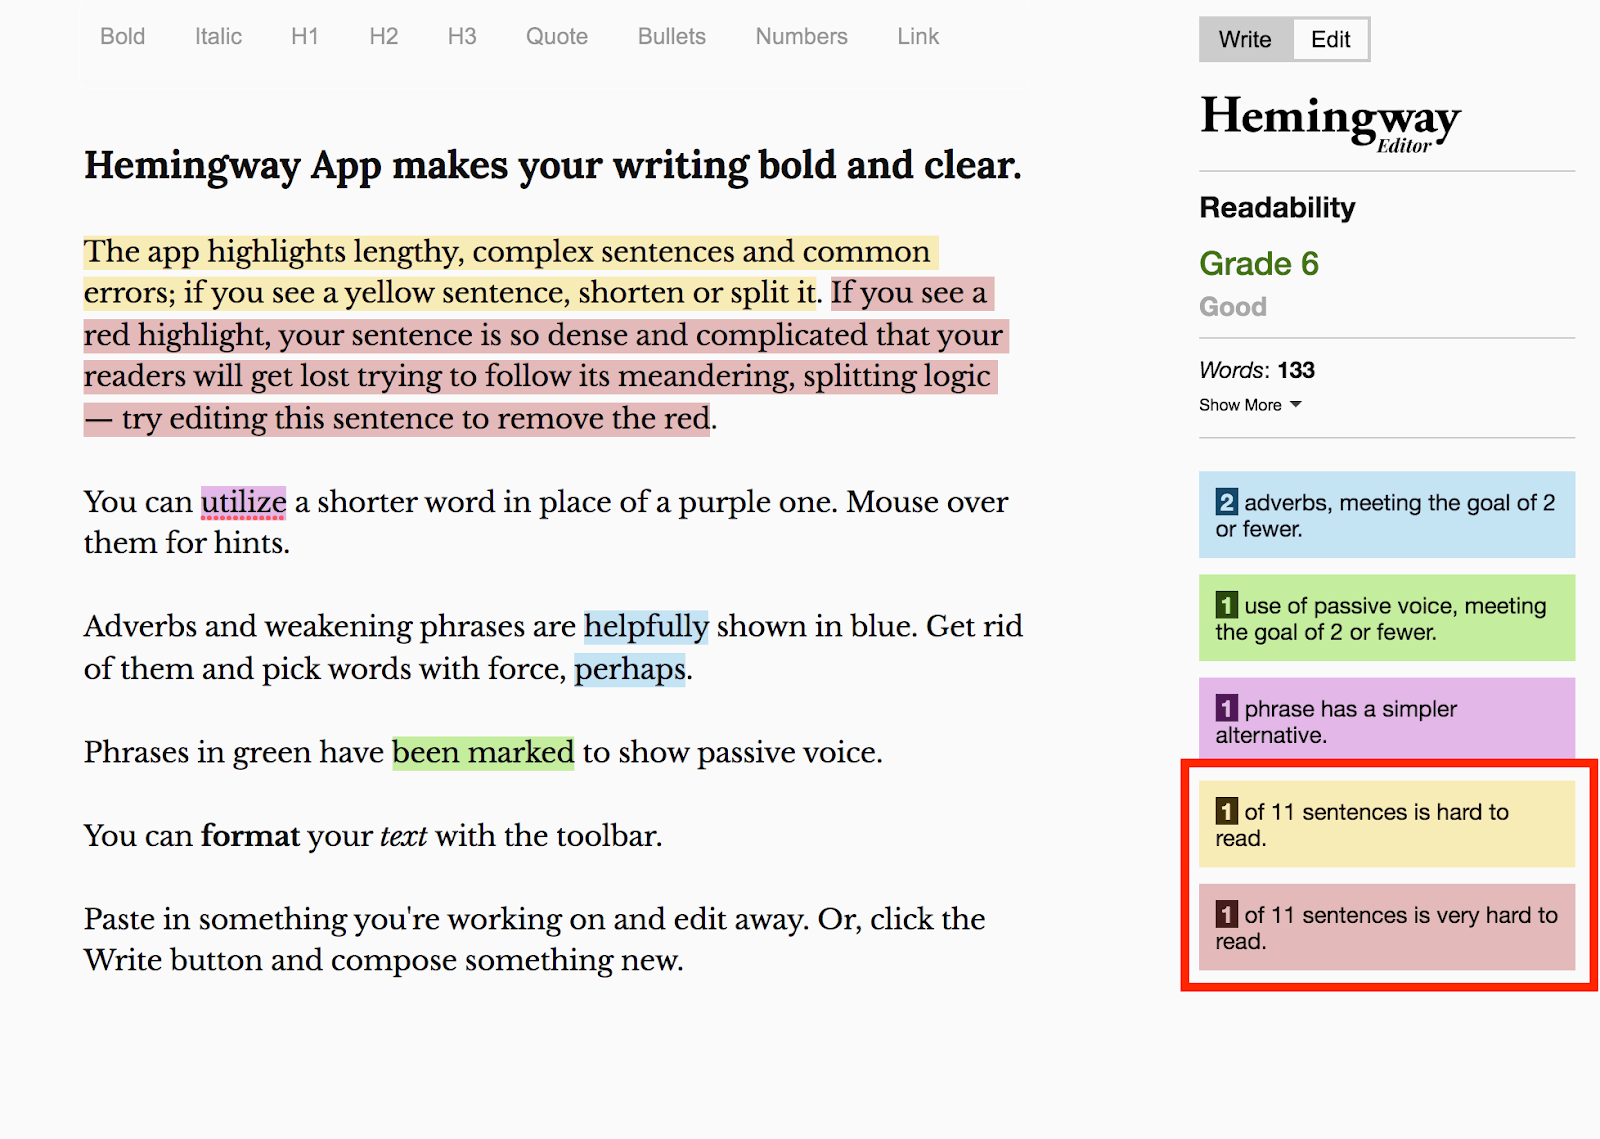 Example of a how the Hemingway App helps users edit their writing